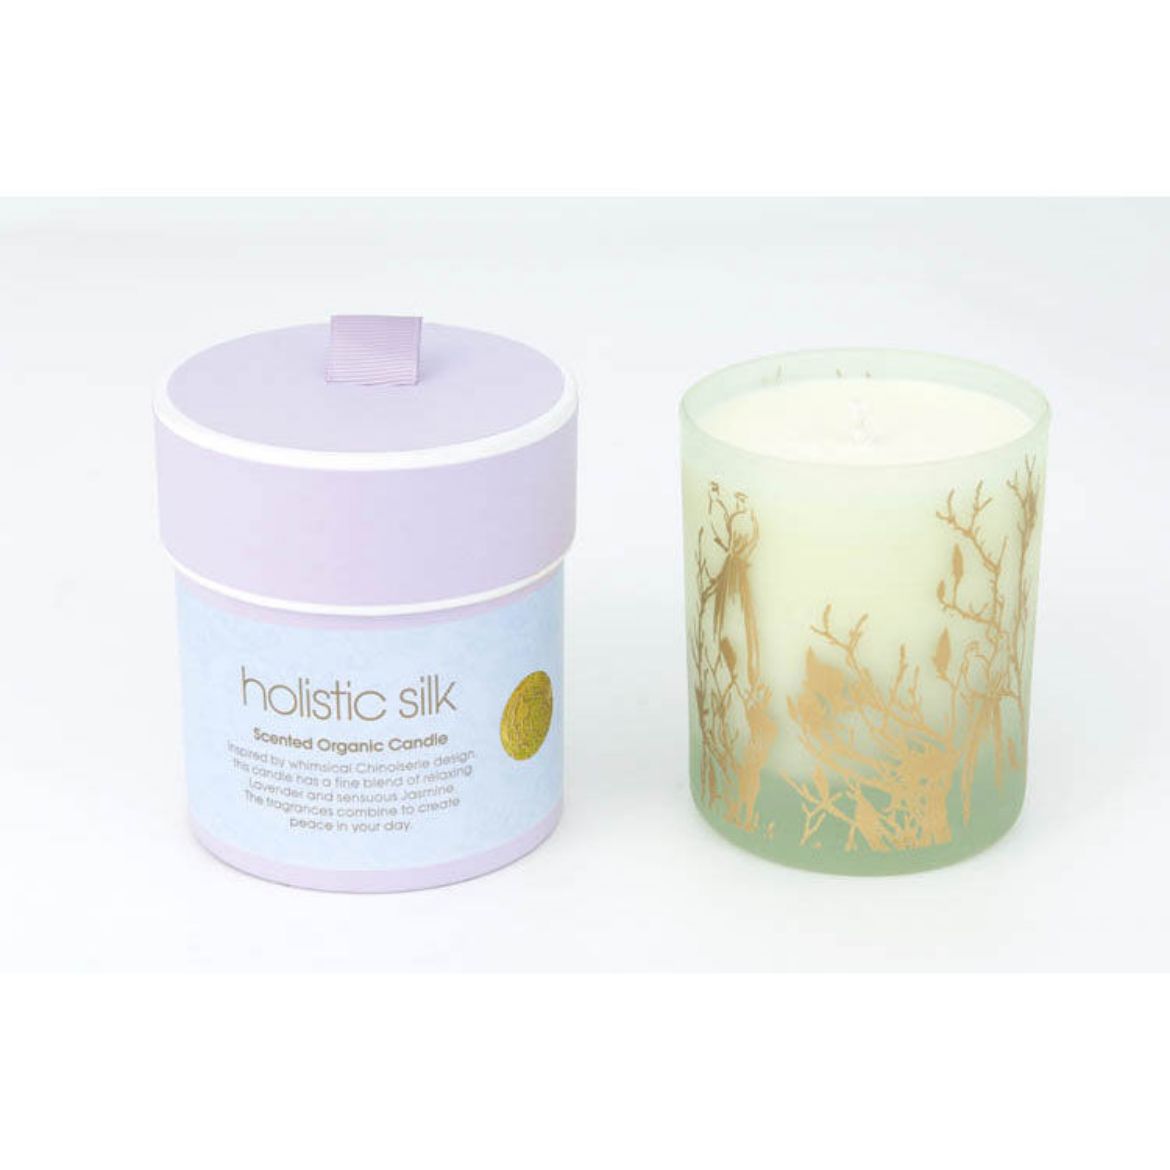 Image of Holistic Silk Deeply Relaxing Scented Candle